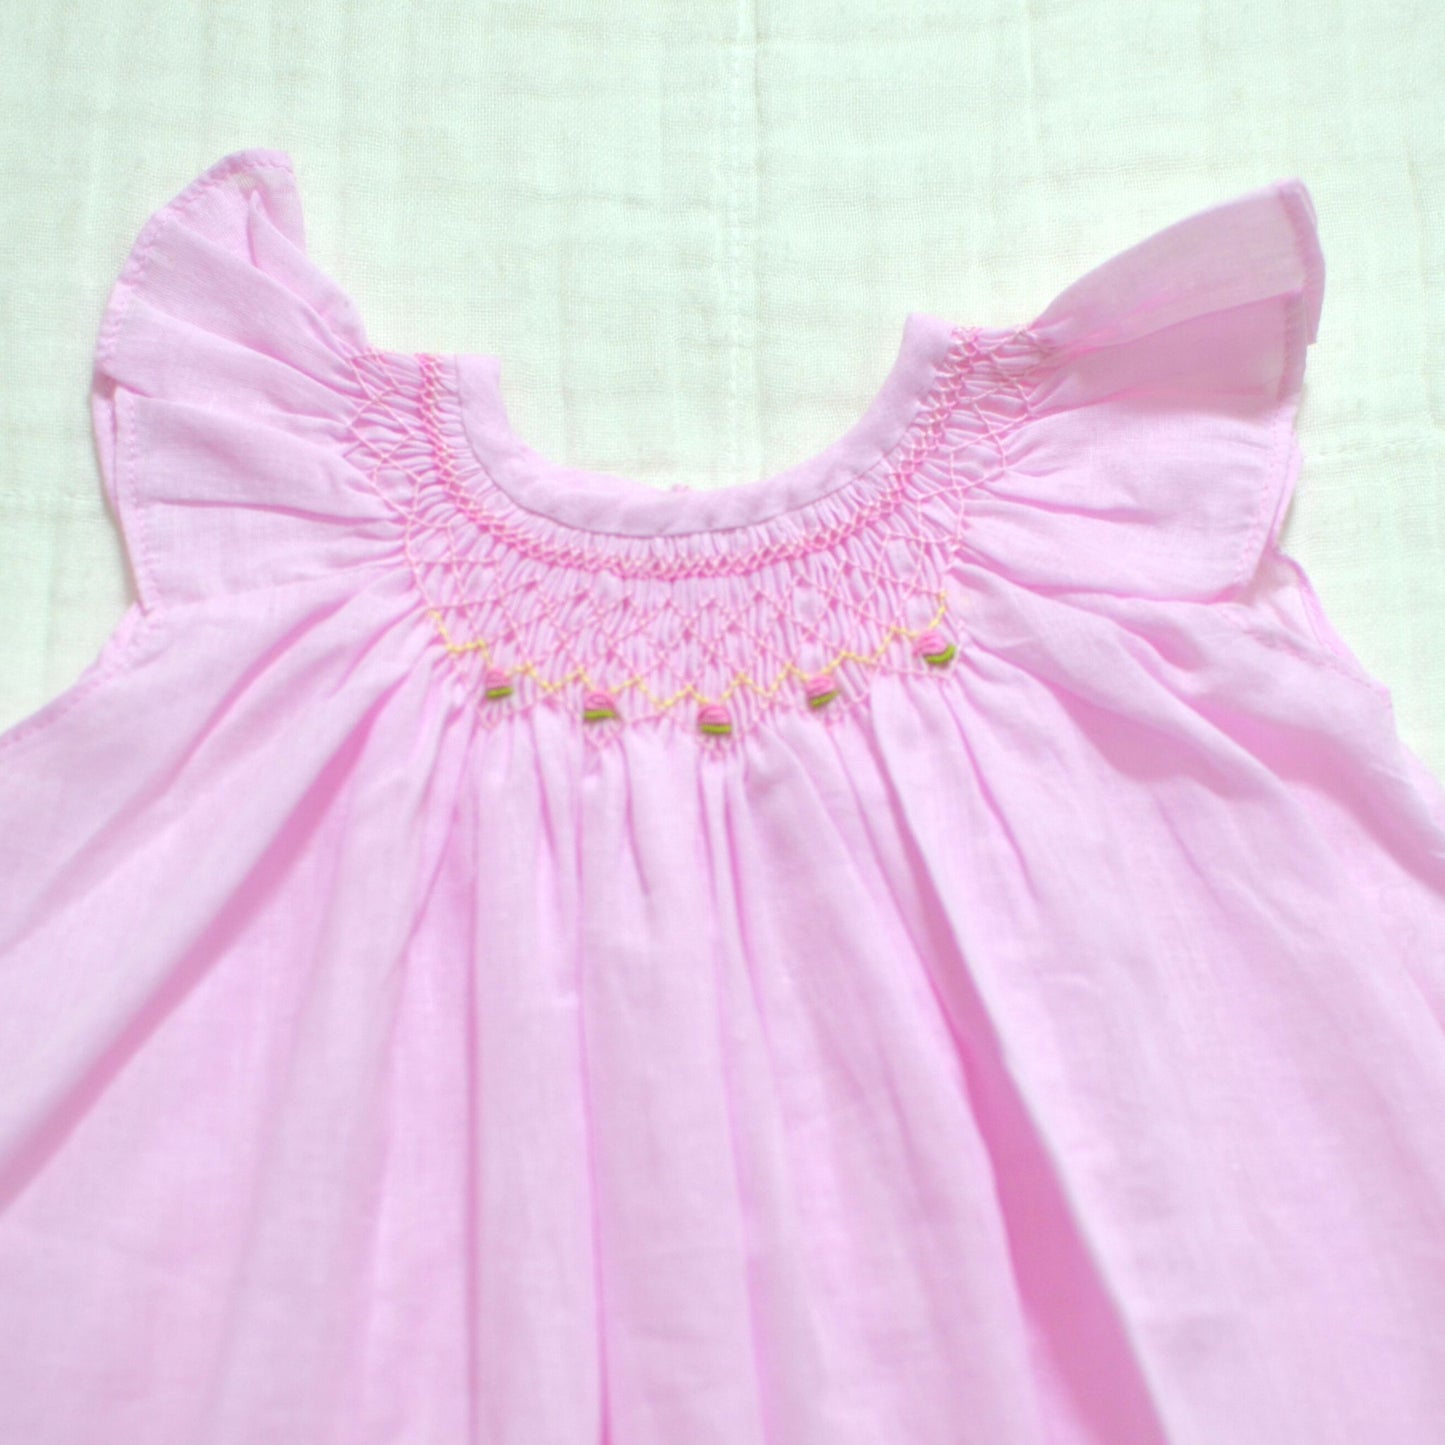 Handmade Smocked Dress Colours - 3 to 6 months